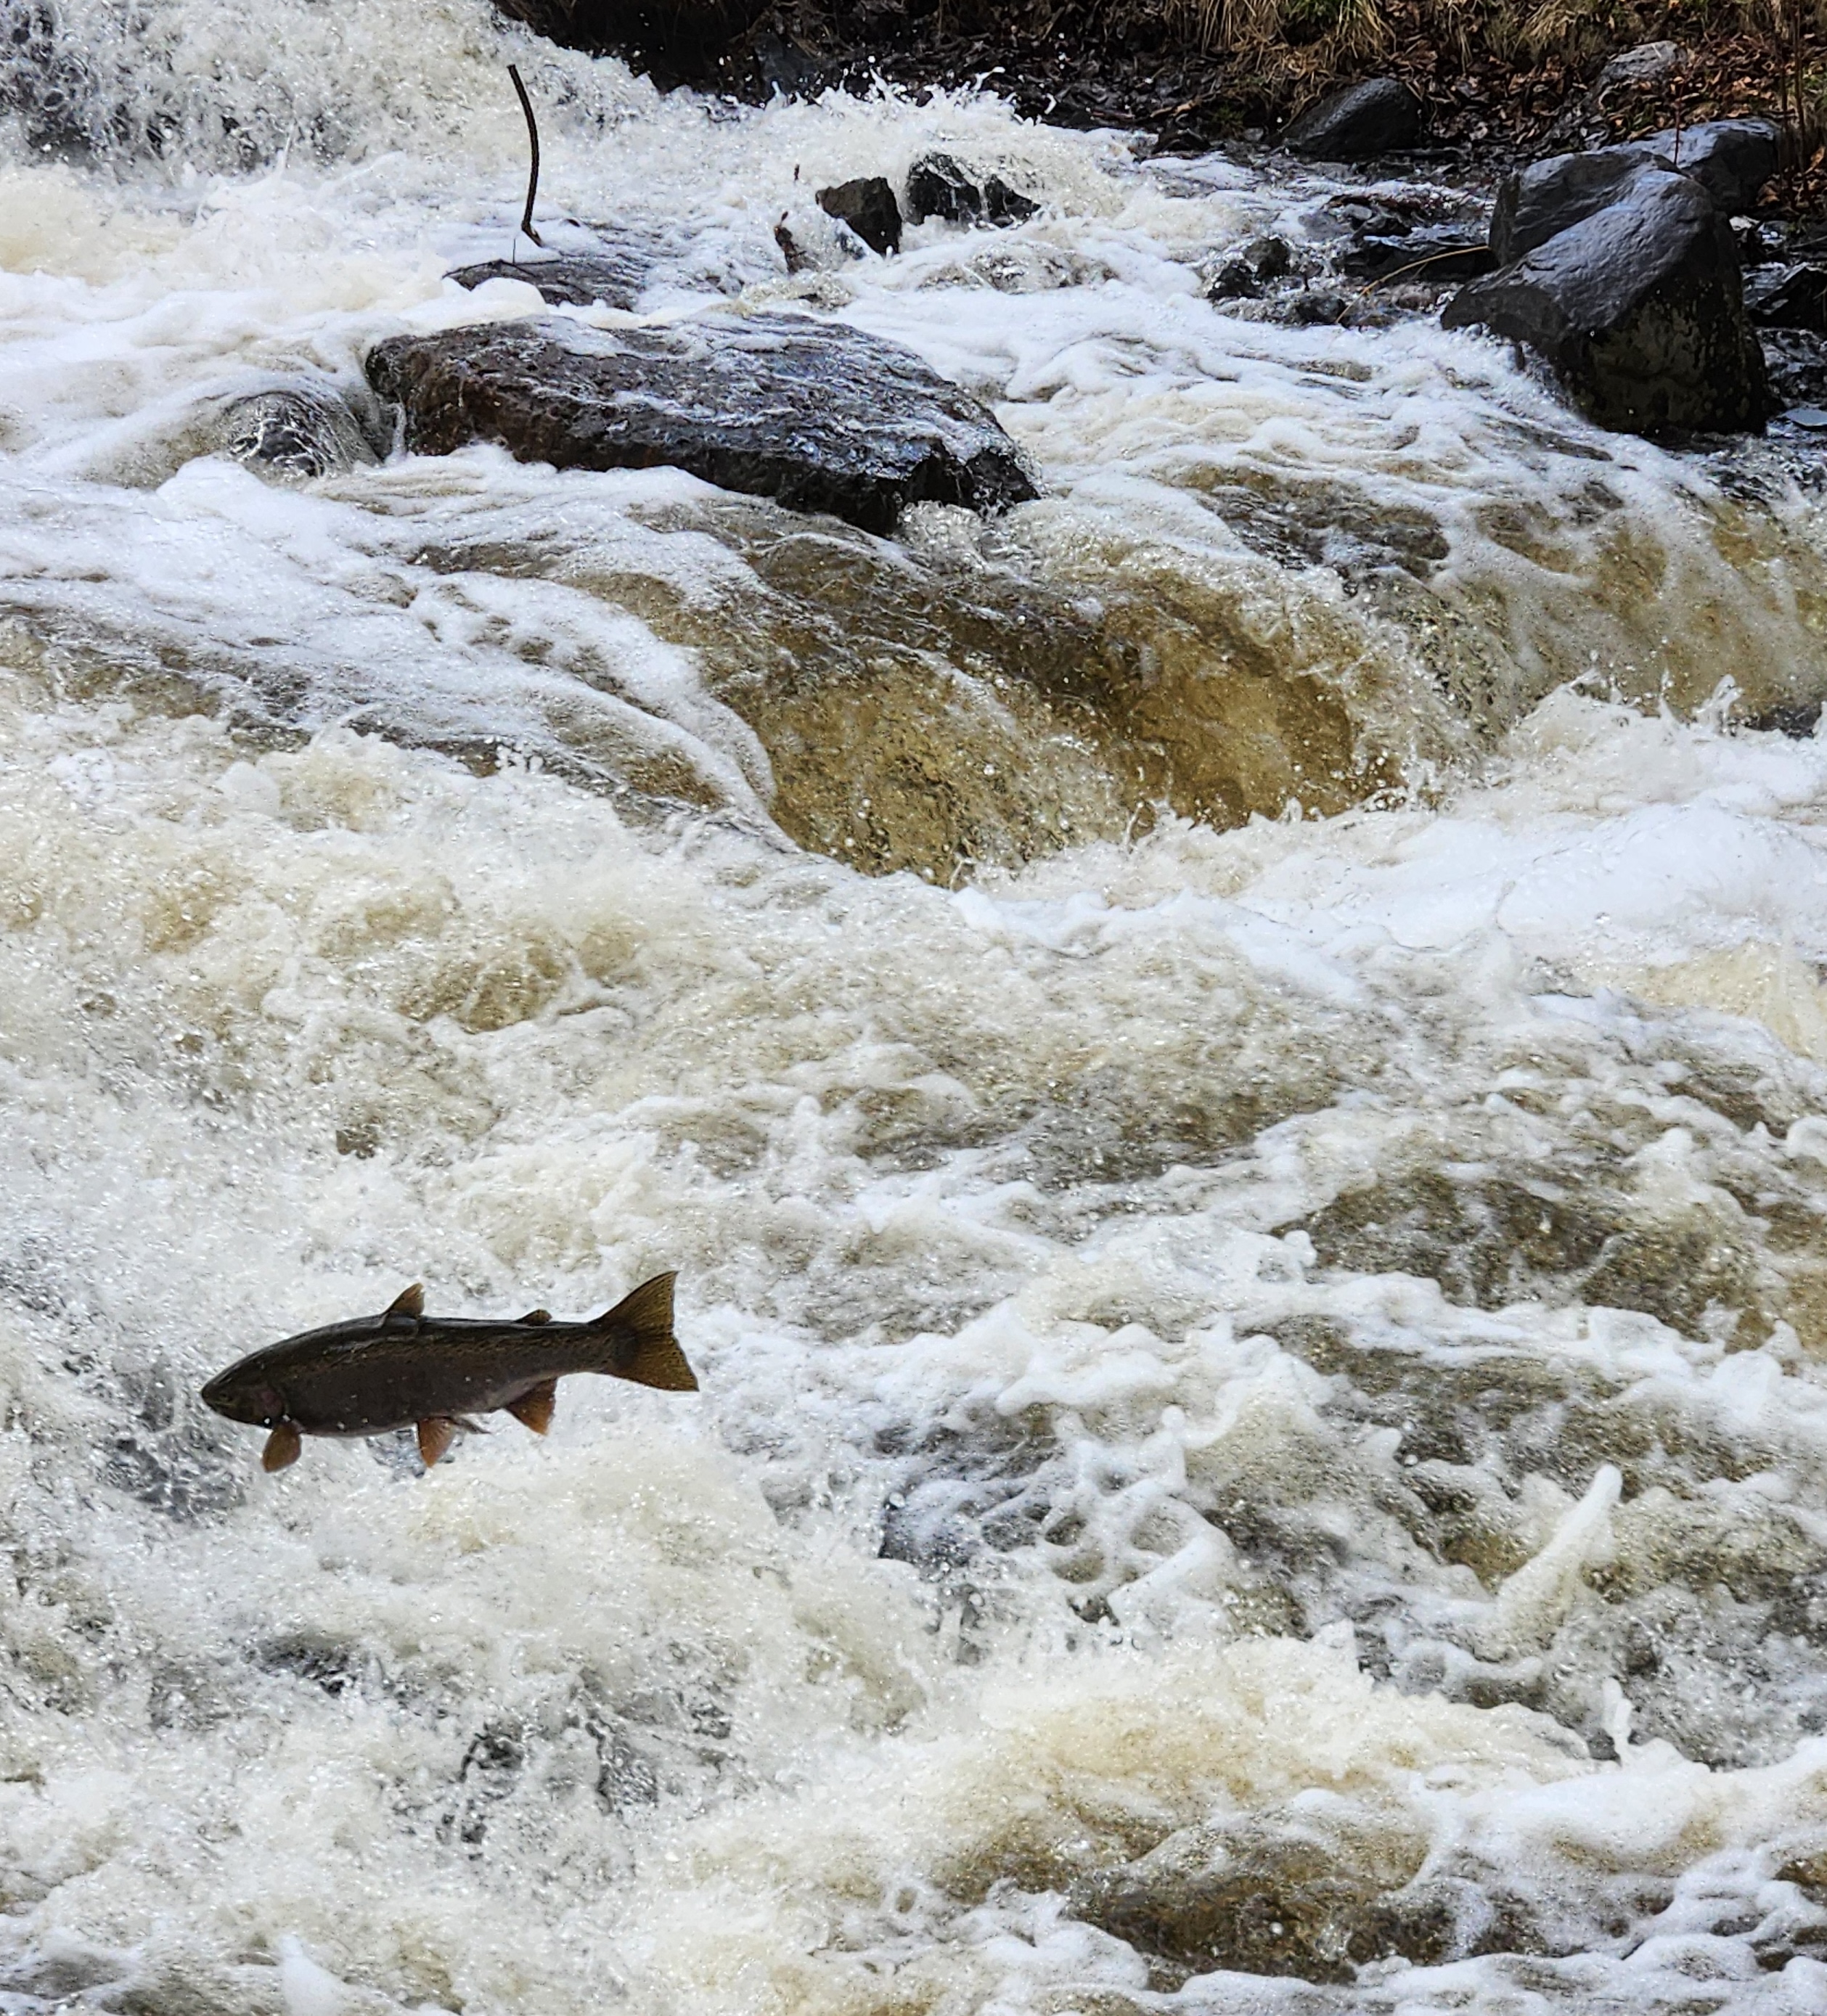 a fish jumping up rushing rapids next to rocky banks in McVicar Creek